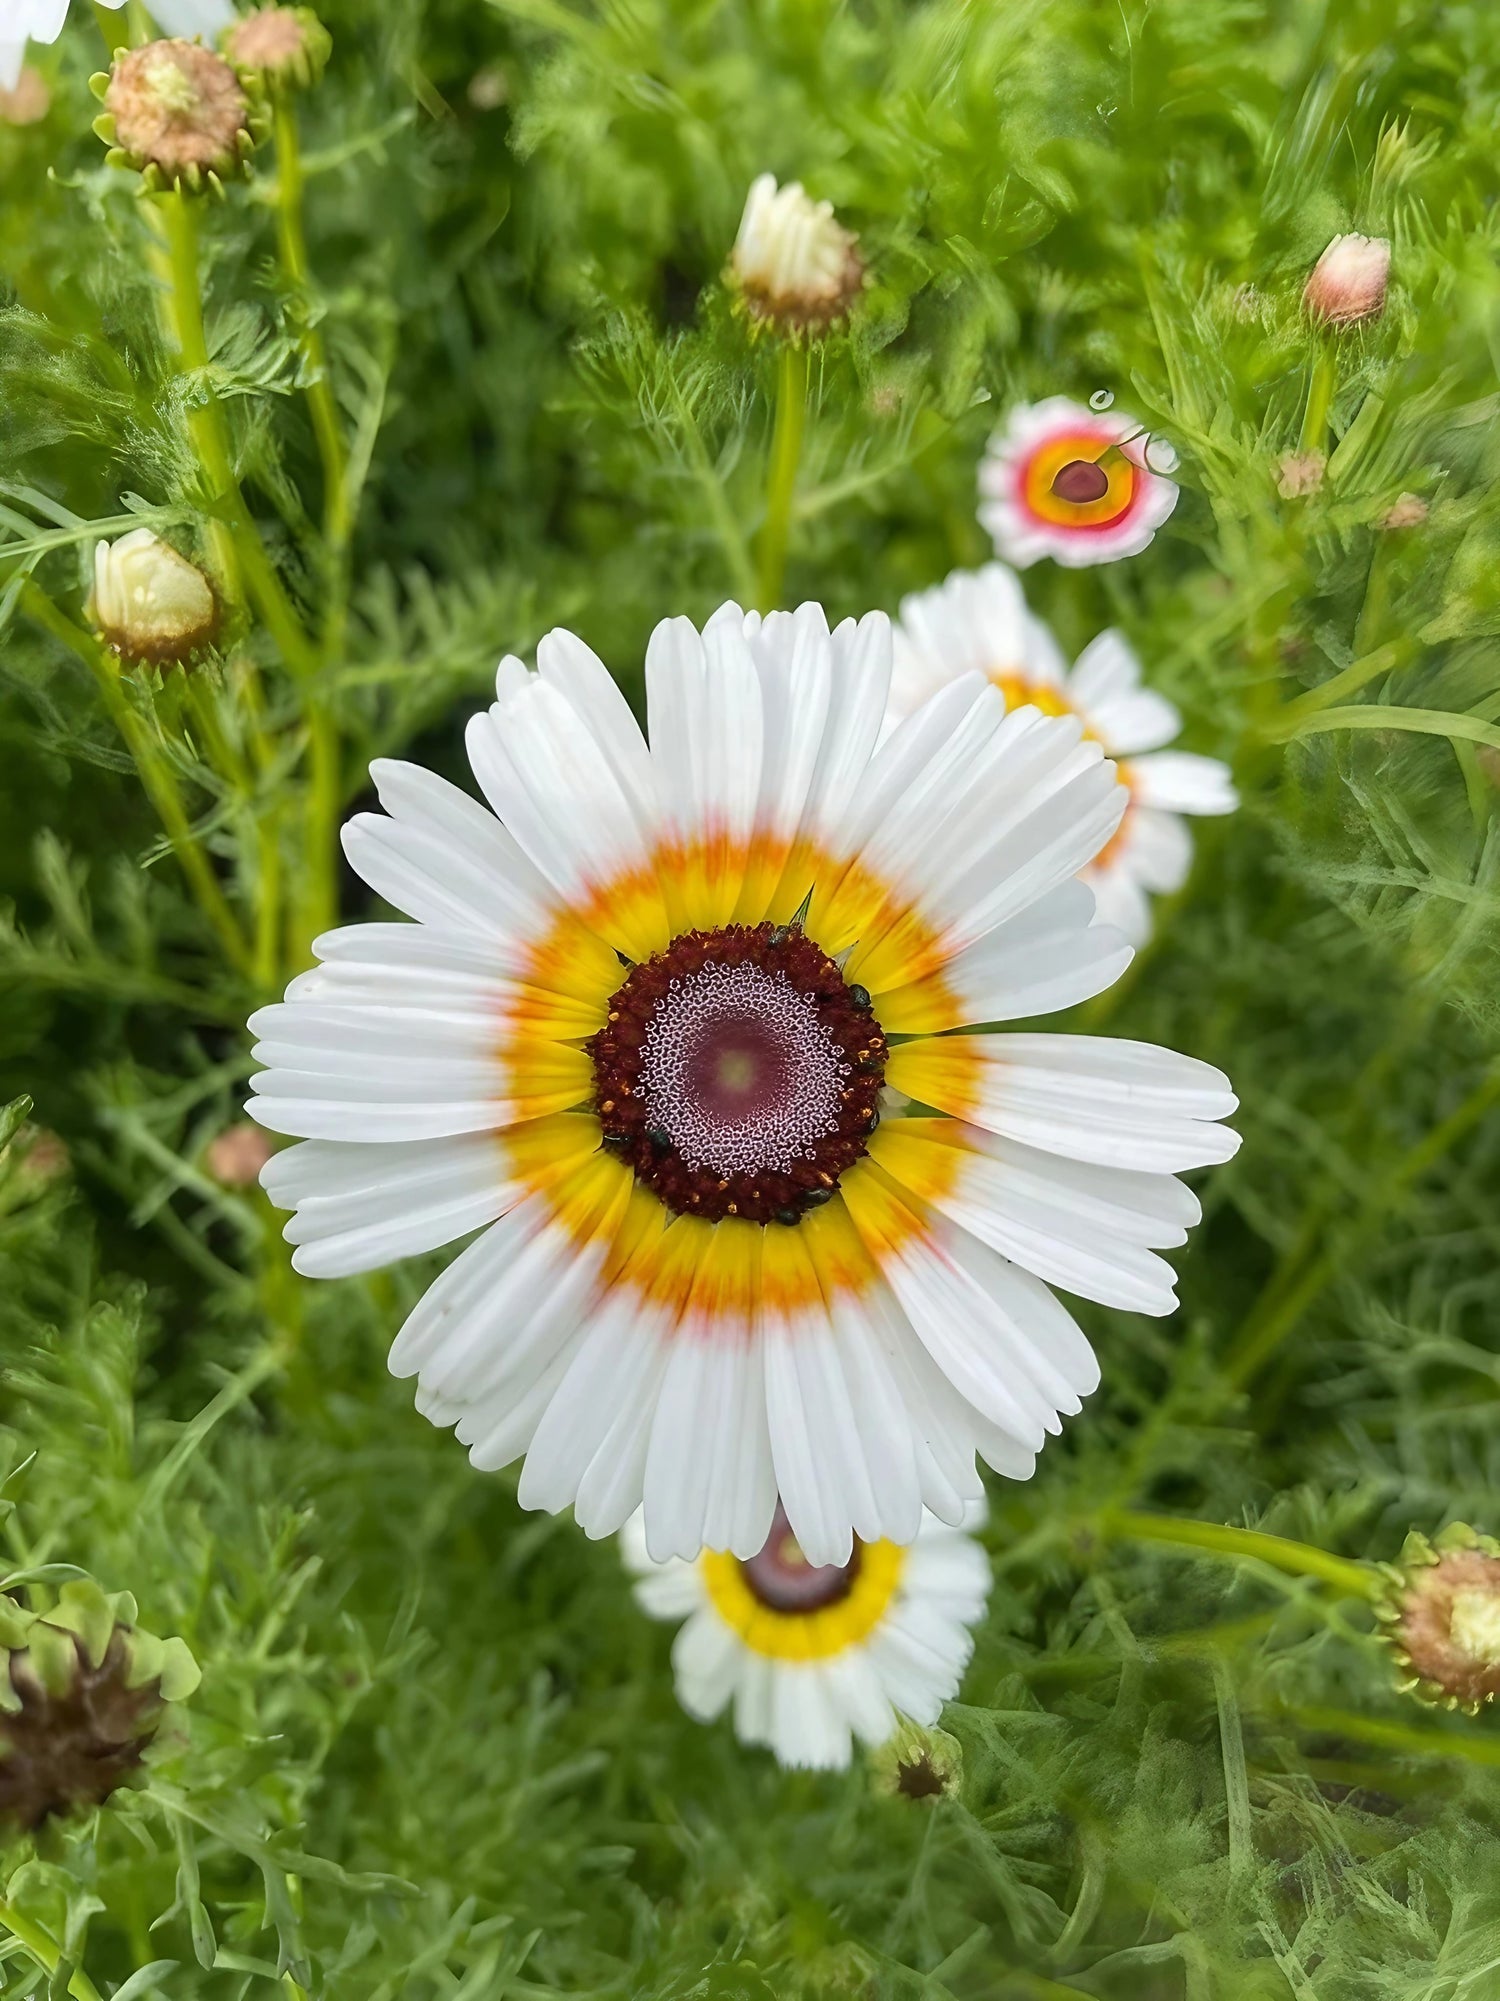 A close-up of a Chrysanthemum Painted Daisy with white petals and a yellow center